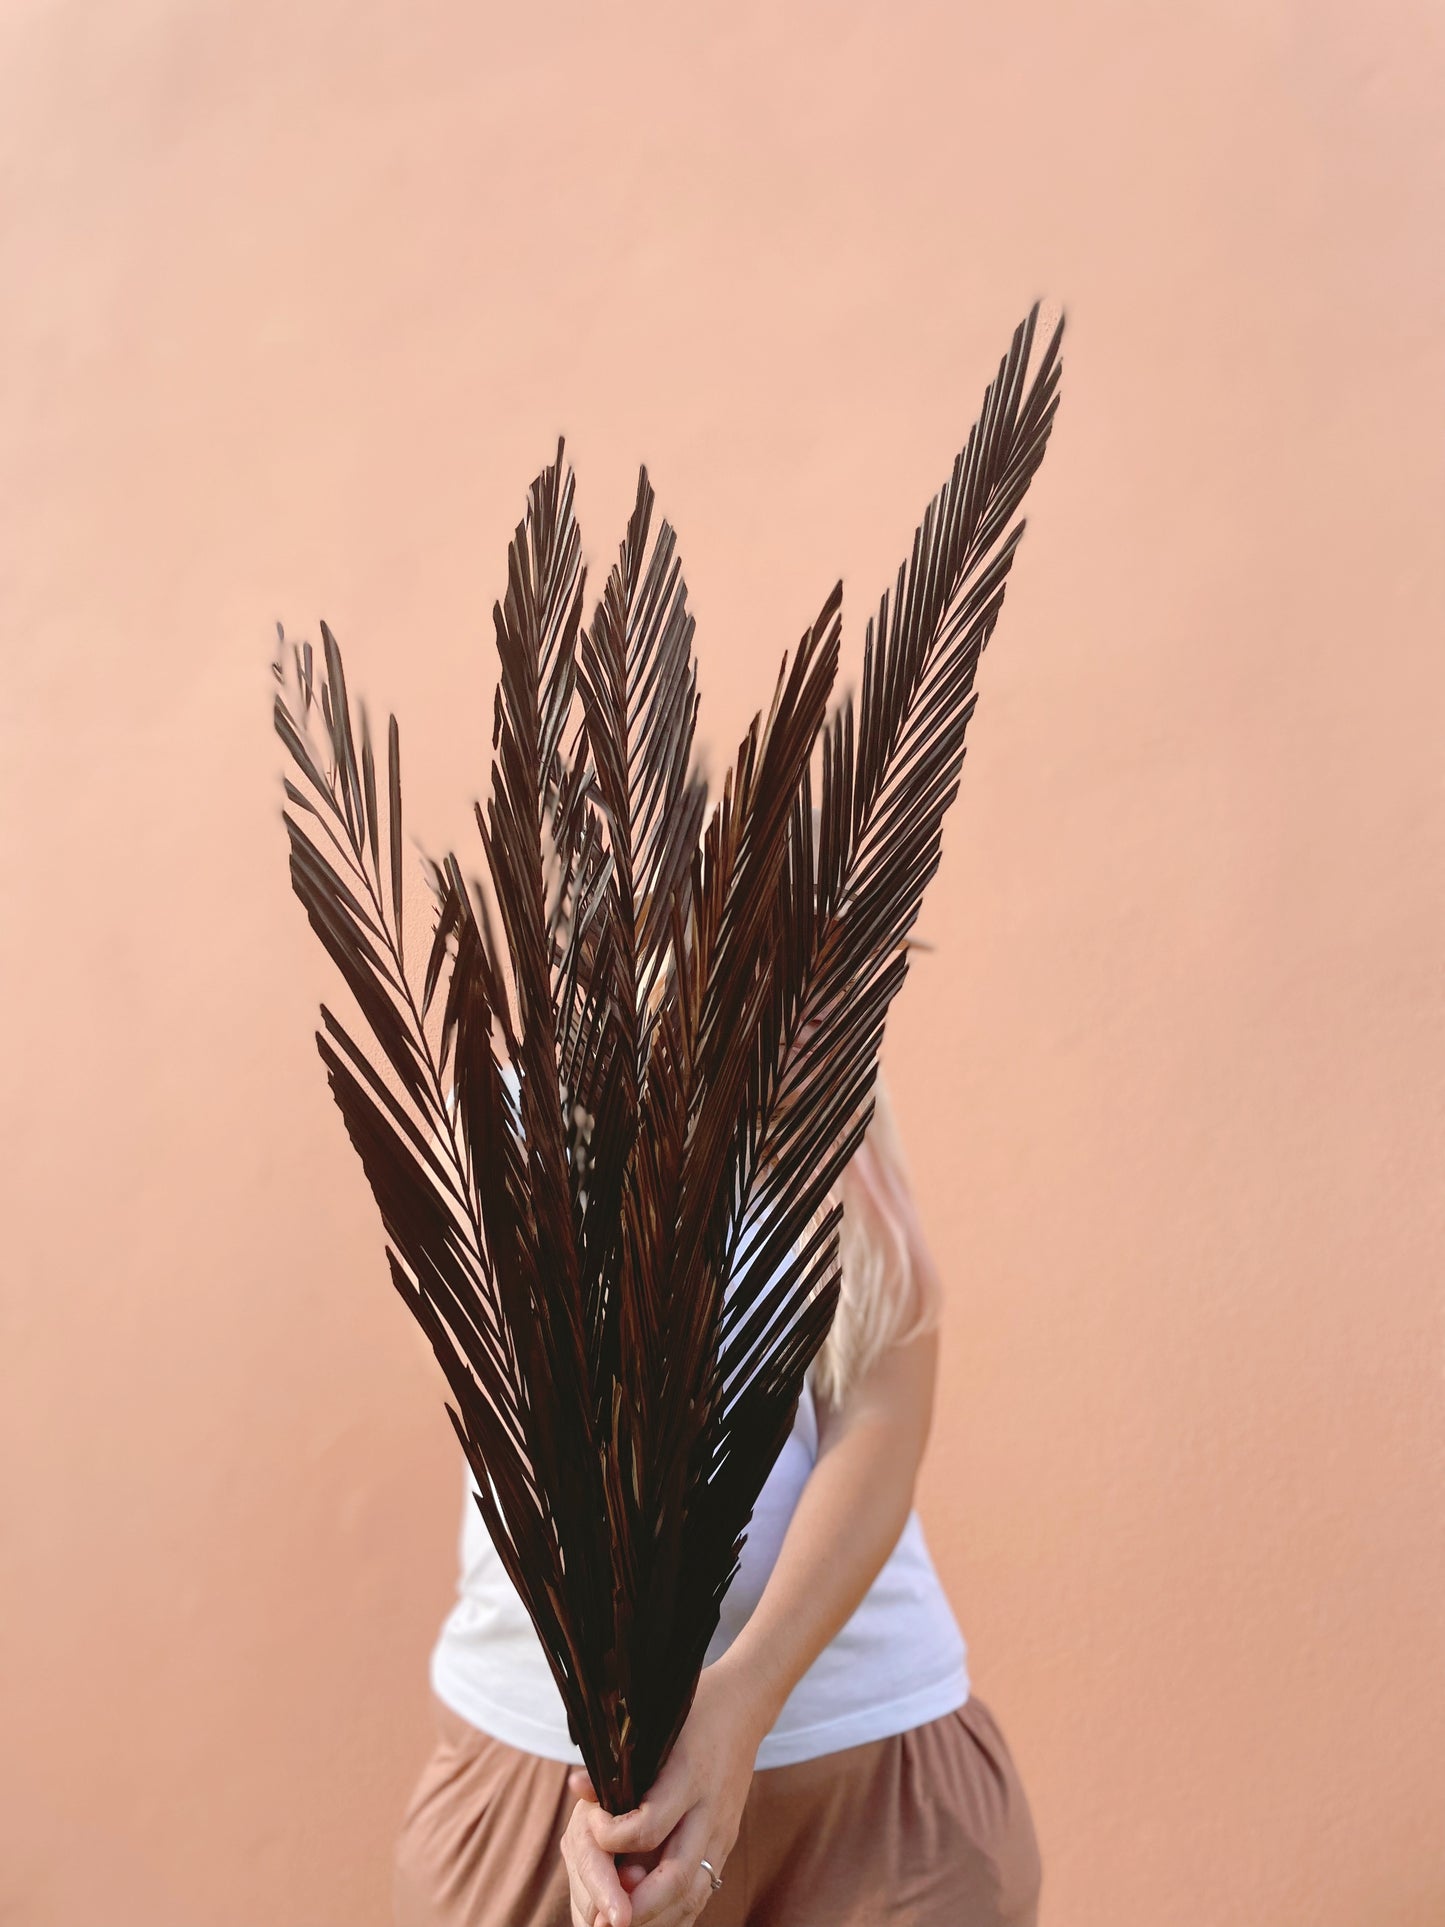 3 Pcs Natural Sago Palm Leaves Branches, Dried Painted Sago